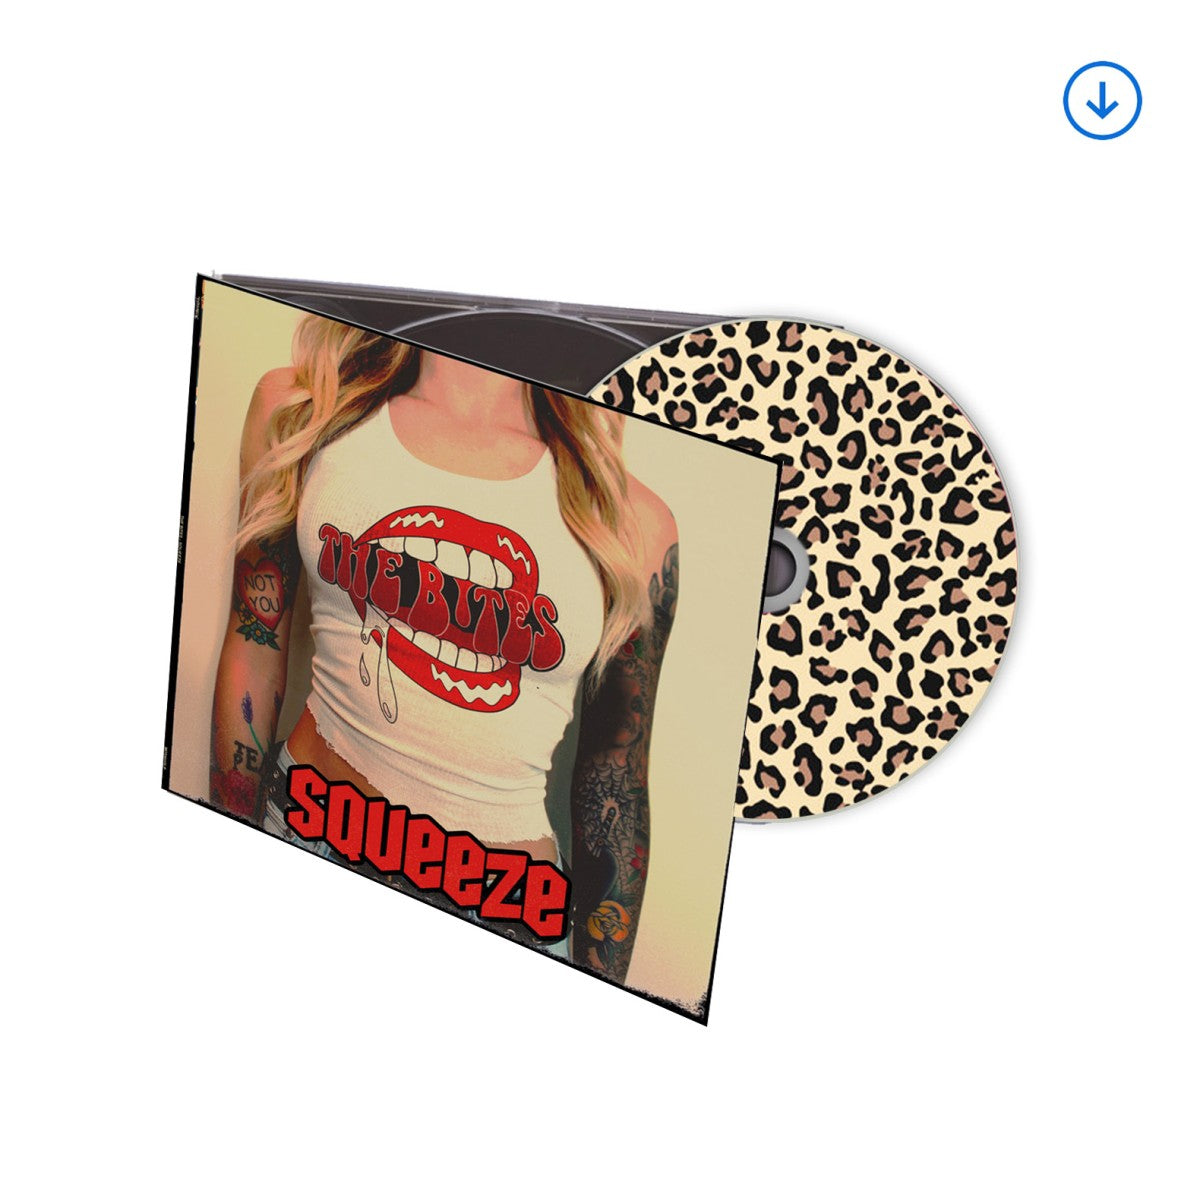 The Bites "Squeeze" Leopard Print CD (100 Copies Only)